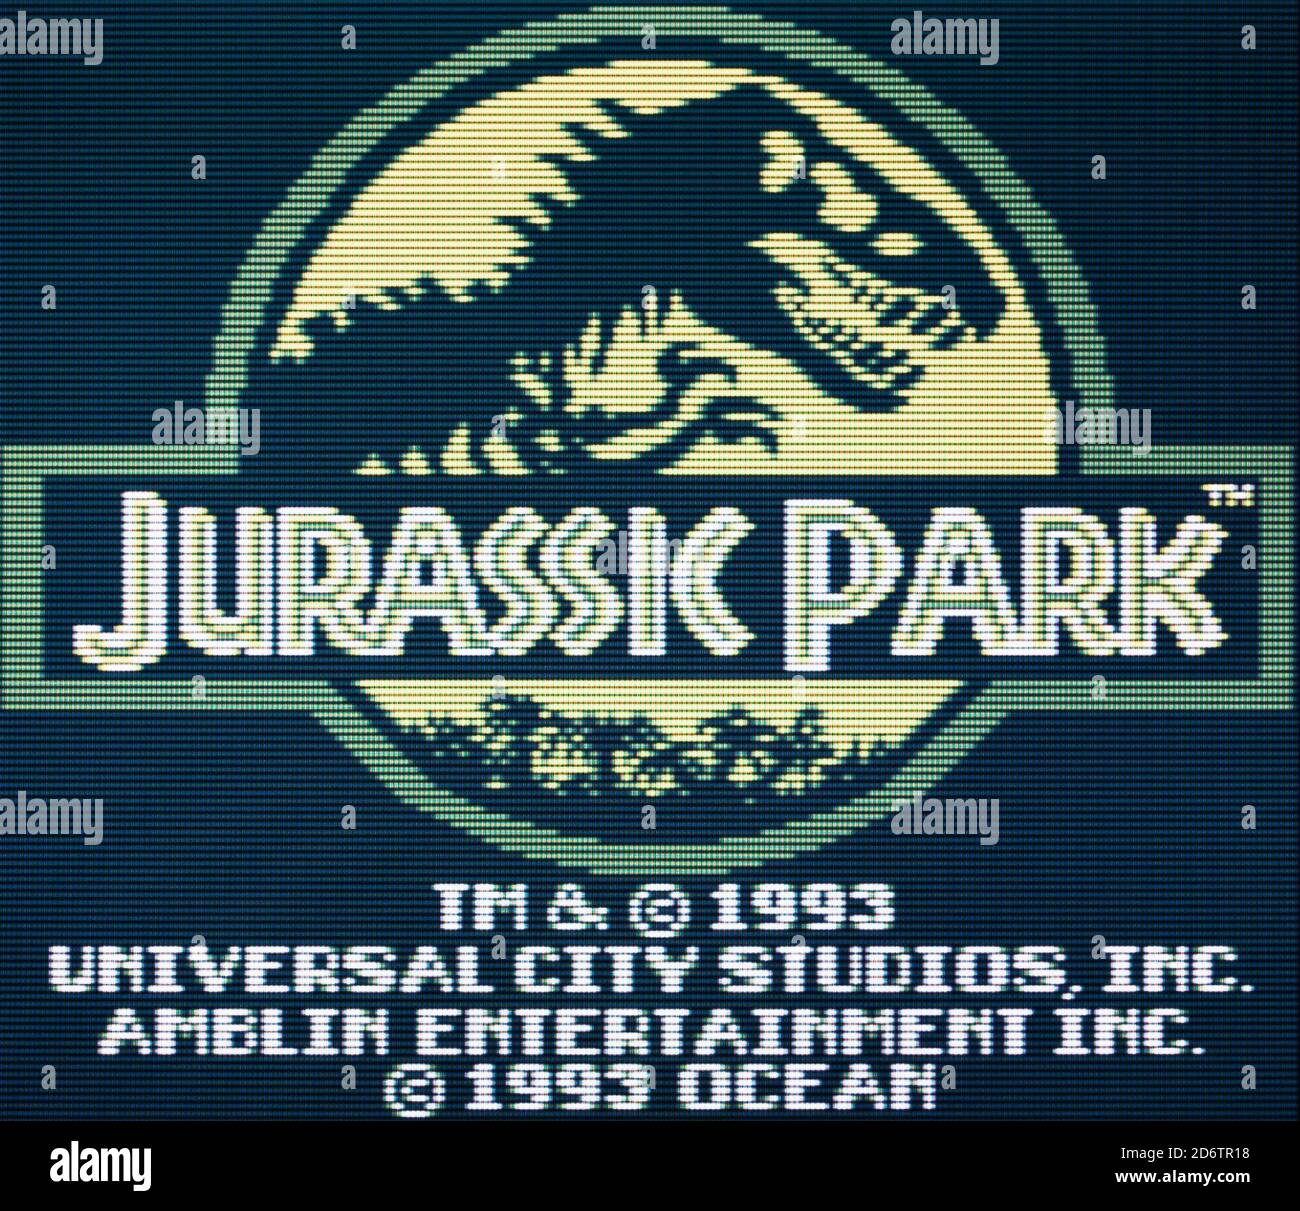 Jurassic Park - Nintendo Gameboy Videogame - Editorial use only Stock Photo